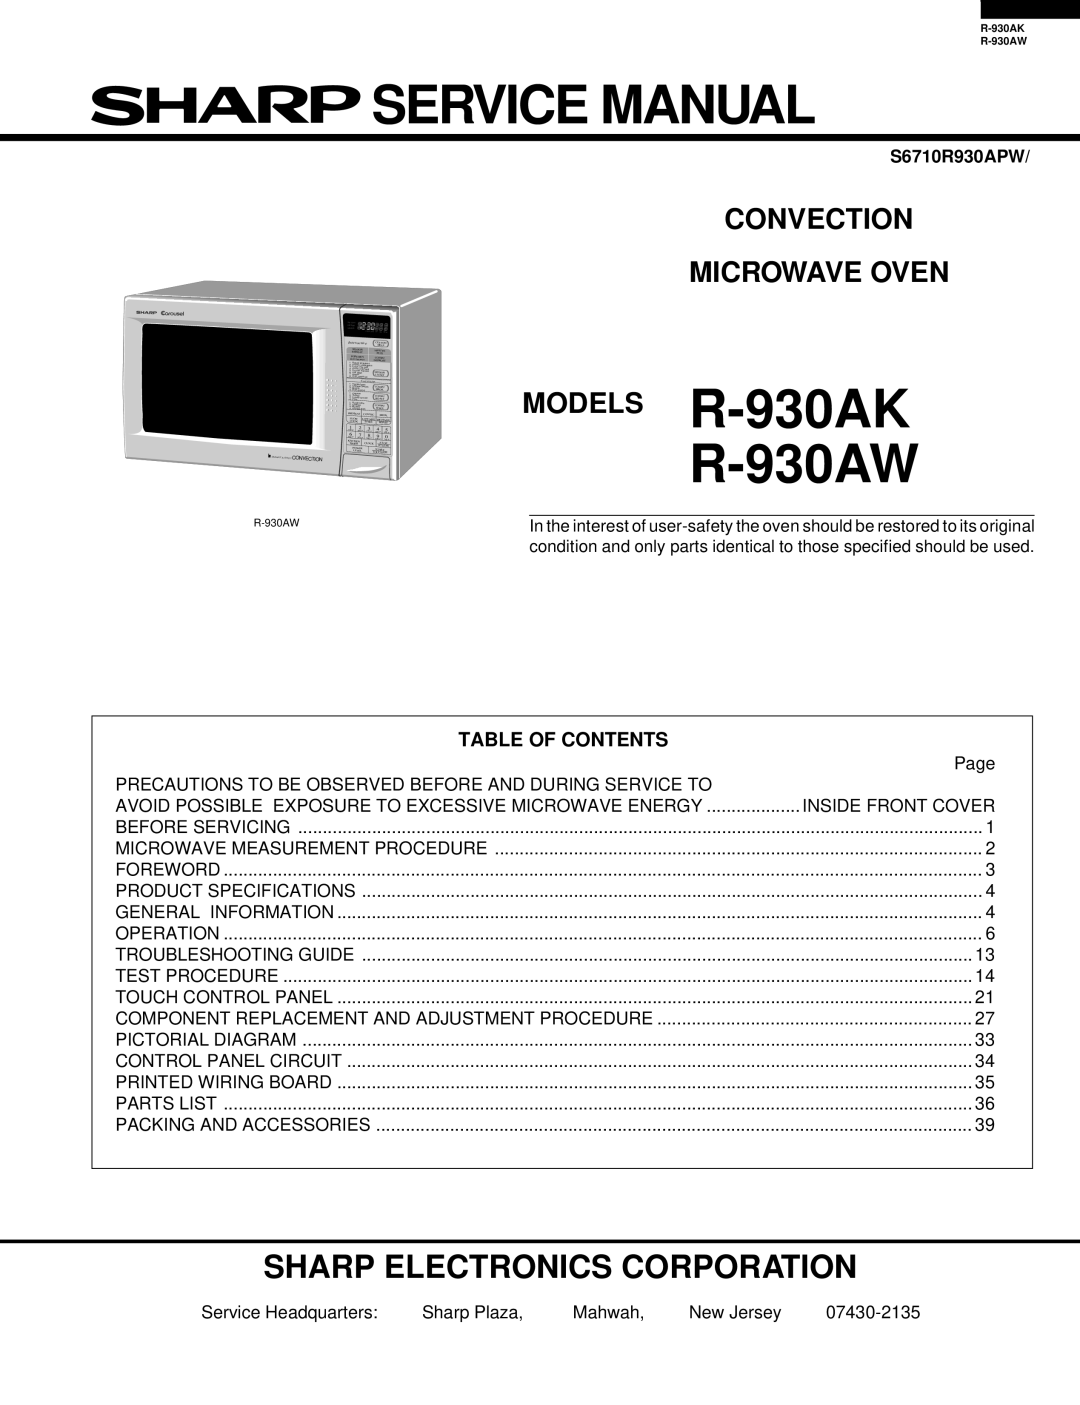 Sharp operation manual Microwave Oven, Contents, R-930CS, R-930AK R-930AW, Smart & Easy, Models 